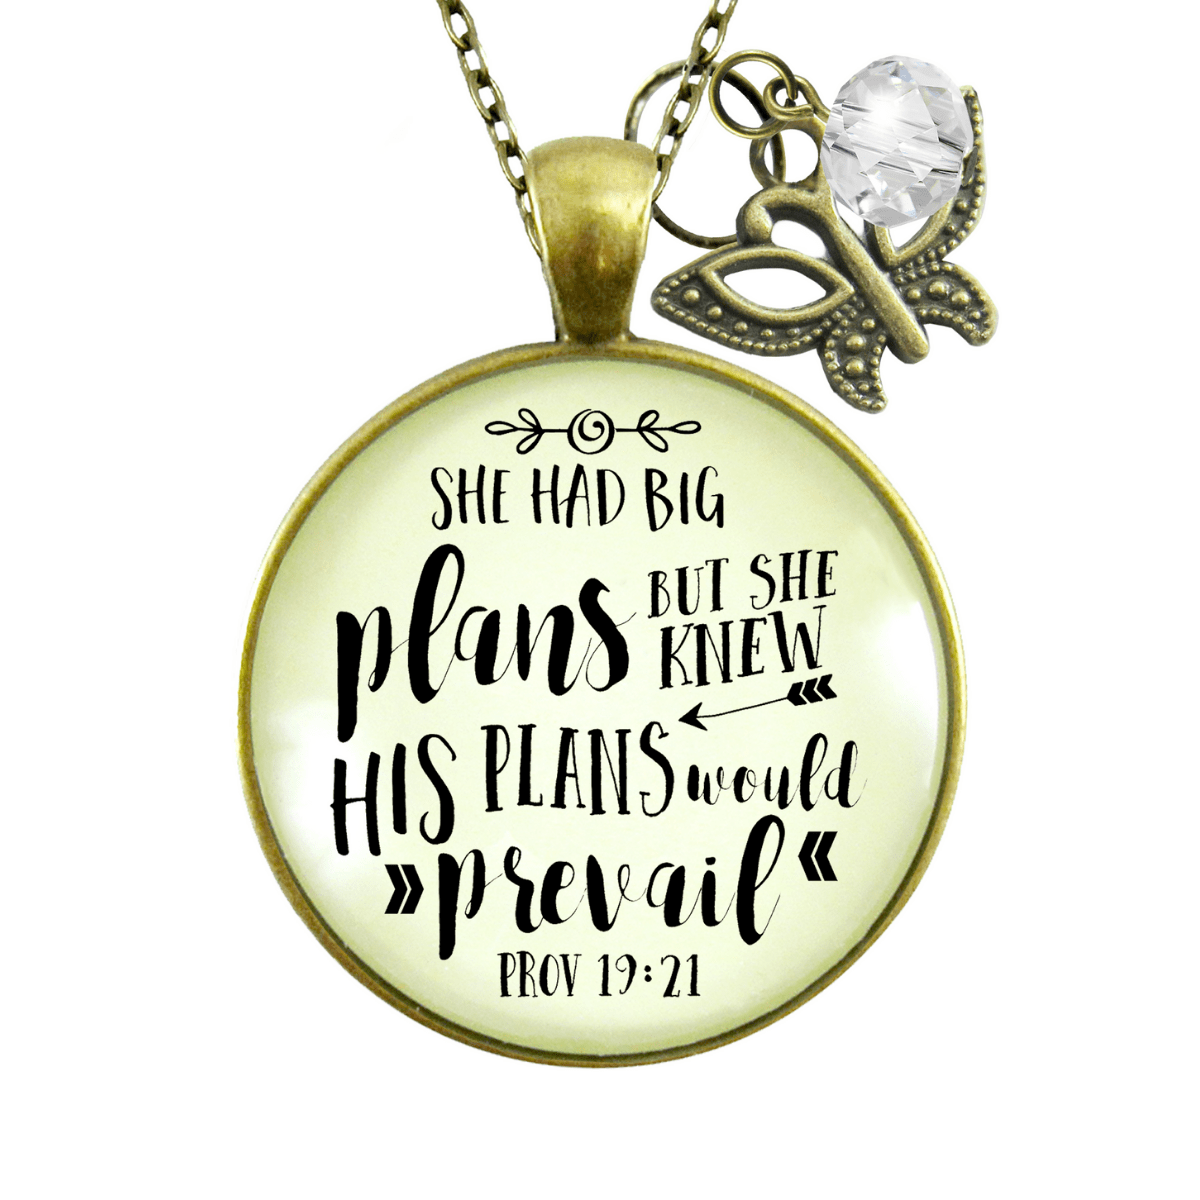 Gutsy Goodness She Had Big Plans Faith Inspired Necklace Life Journey Quote Jewelry - Gutsy Goodness Handmade Jewelry;She Had Big Plans Faith Inspired Necklace Life Journey Quote Jewelry - Gutsy Goodness Handmade Jewelry Gifts